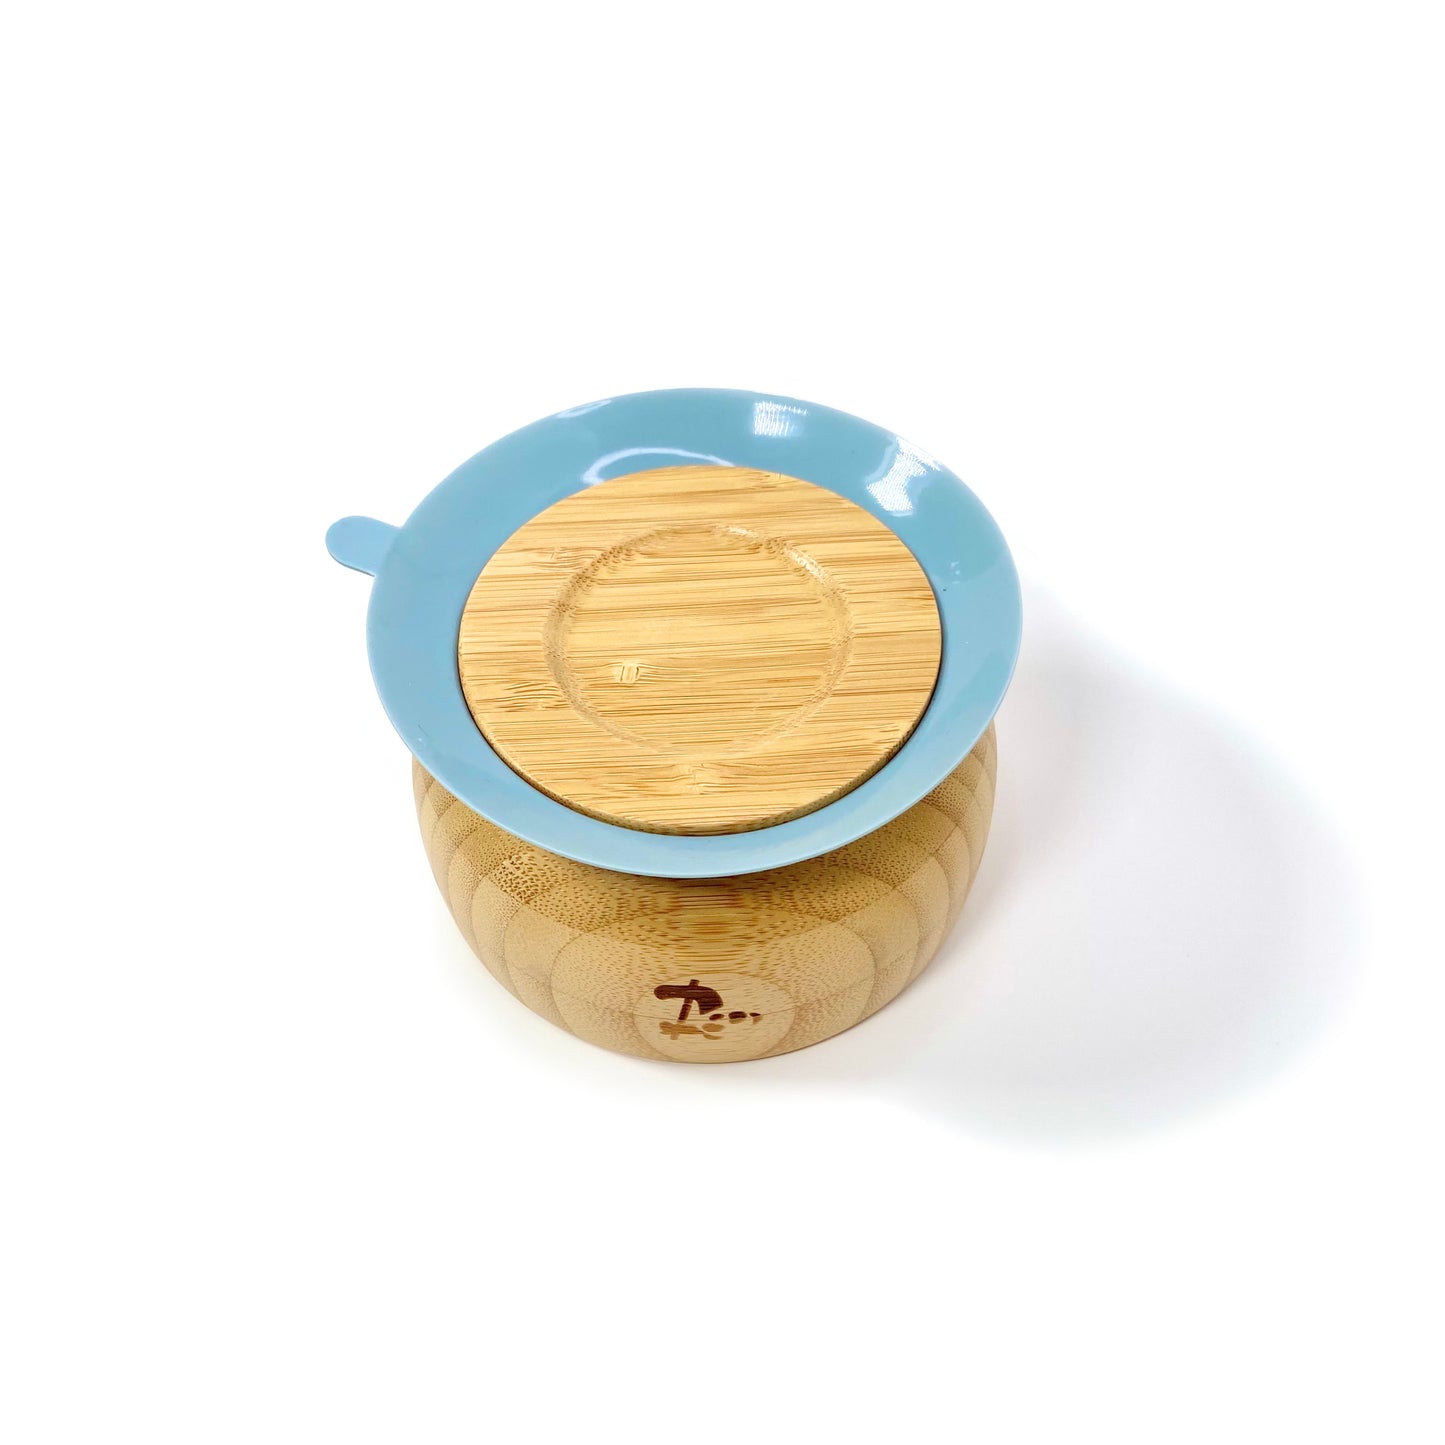 A children’s bamboo bowl with a sky blue silicone suction ring. Image shows the underside of the bowl, featuring the silicone suction ring.